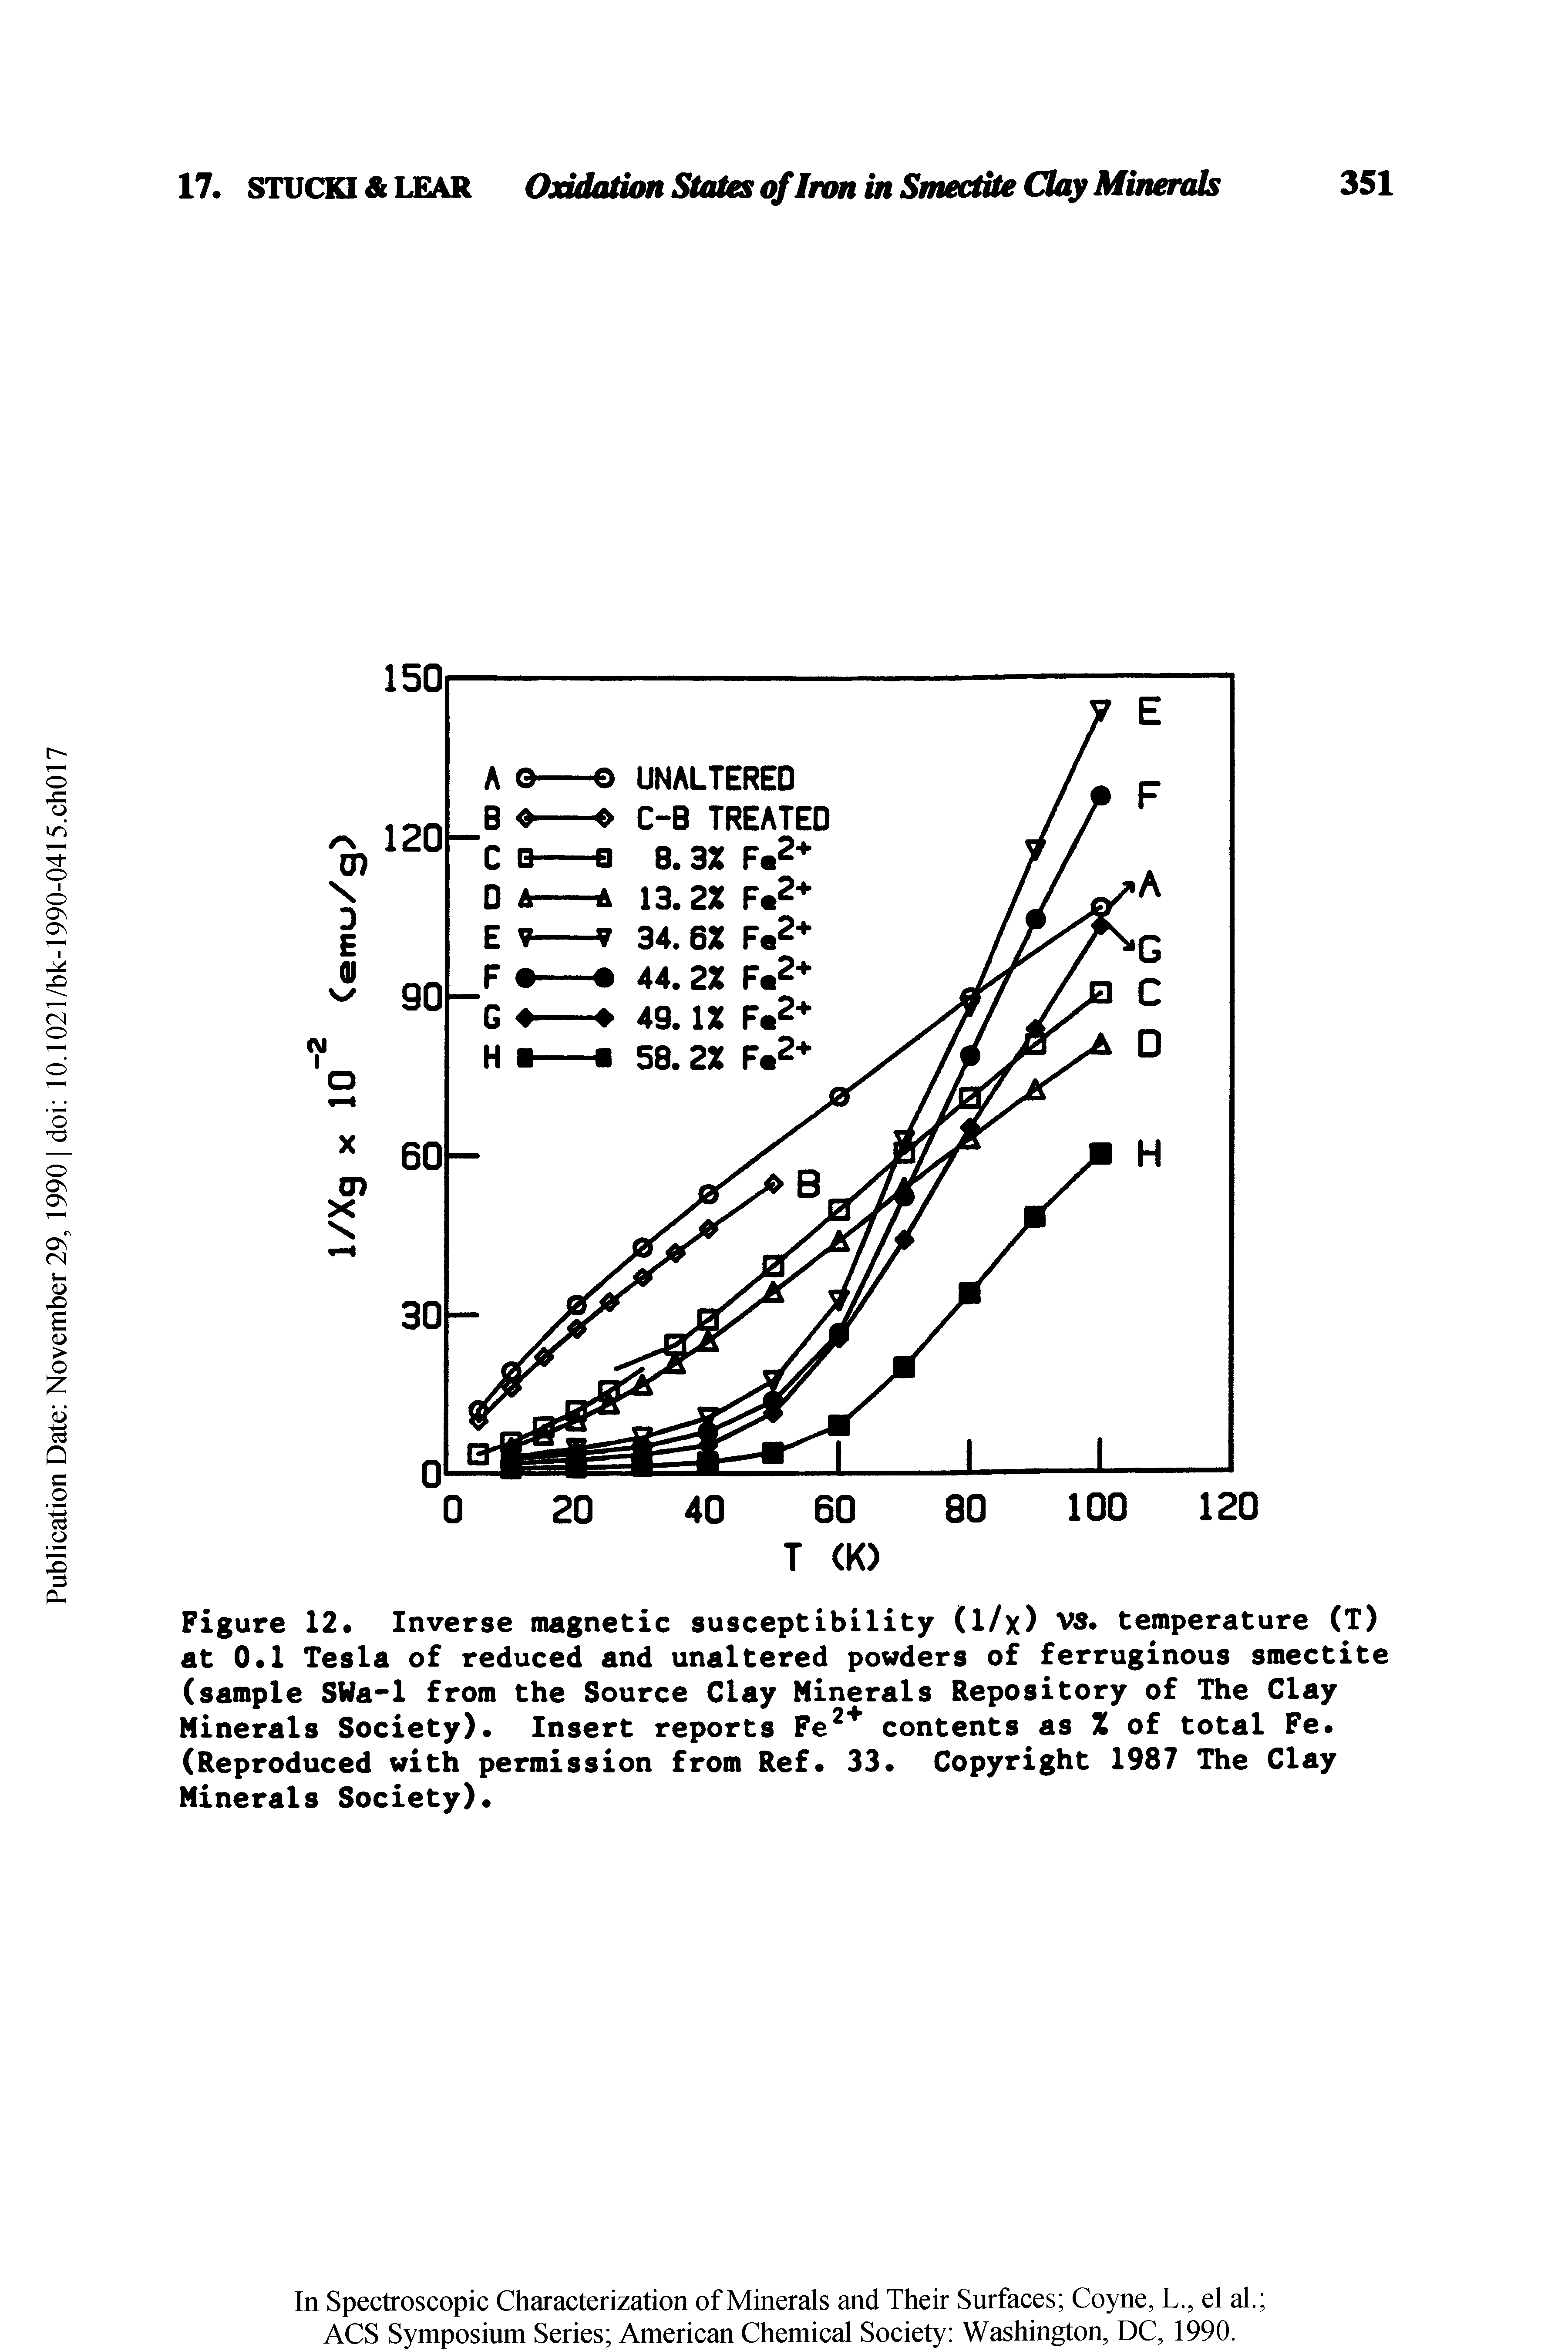 Figure 12. Inverse magnetic susceptibility (1/x) VS. temperature (T) at 0.1 Tesla of reduced and unaltered powders of ferruginous smectite (sample SWa-1 from the Source Clay Minerals Repository of The Clay Minerals Society). Insert reports Fe2 contents as X of total Fe. (Reproduced with permission from Ref. 33. Copyright 1987 The Clay Minerals Society).